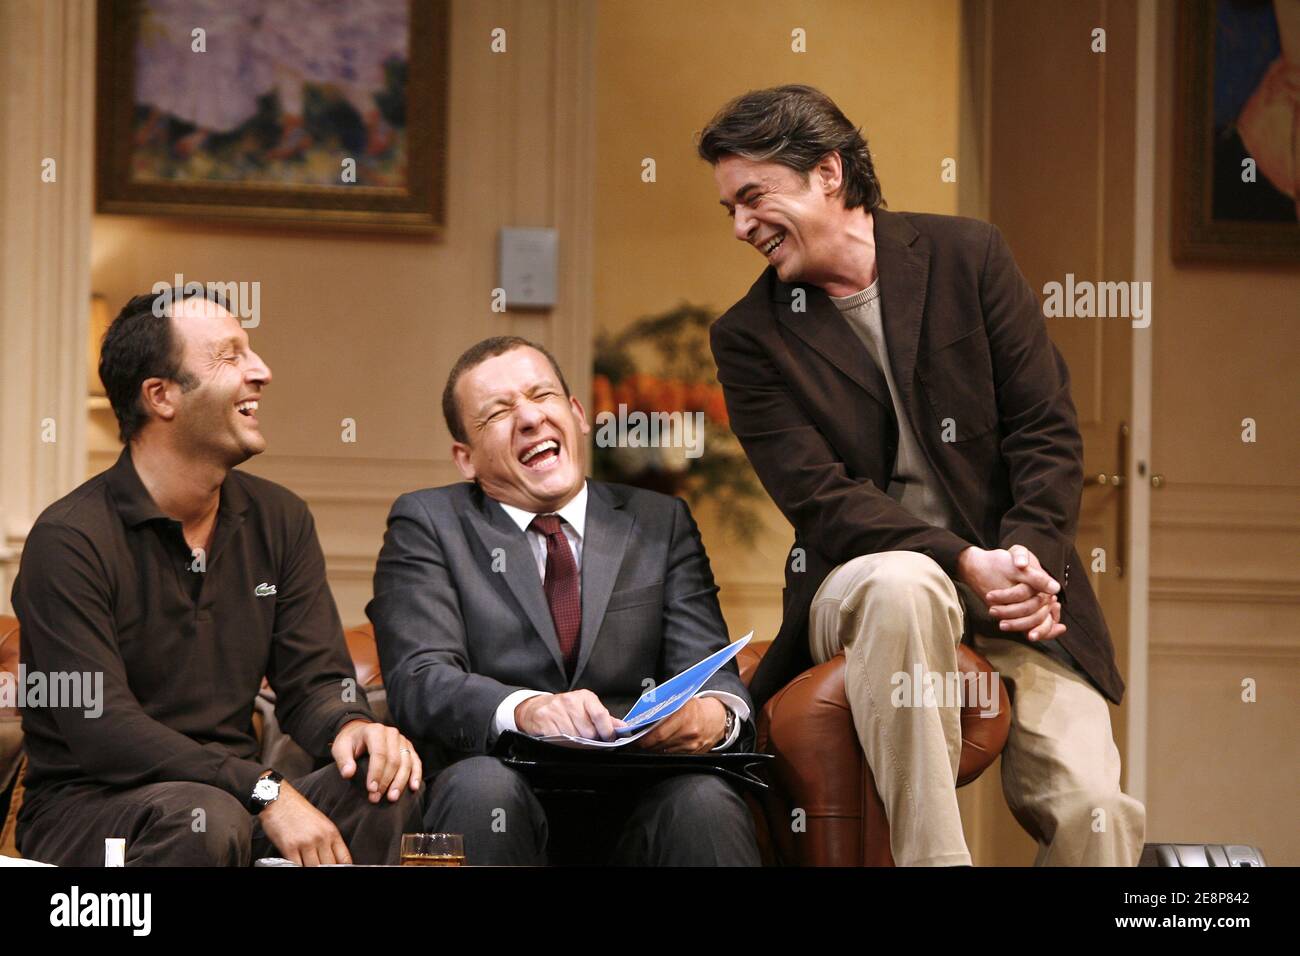 French actors Dany Boon, Arthur and Stephane Bierry during the run-through of the play 'Le Diner de Cons', staged by Francis Veber at the Theatre de la Porte Saint-Martin in Paris, France on September 19, 2007. Also starring in the play: Laurent Gamelon, Jessica Borio, Olivier Granier and Juliette Meyniac. Photo by Thierry Orban/ABACAPRESS.COM Stock Photo